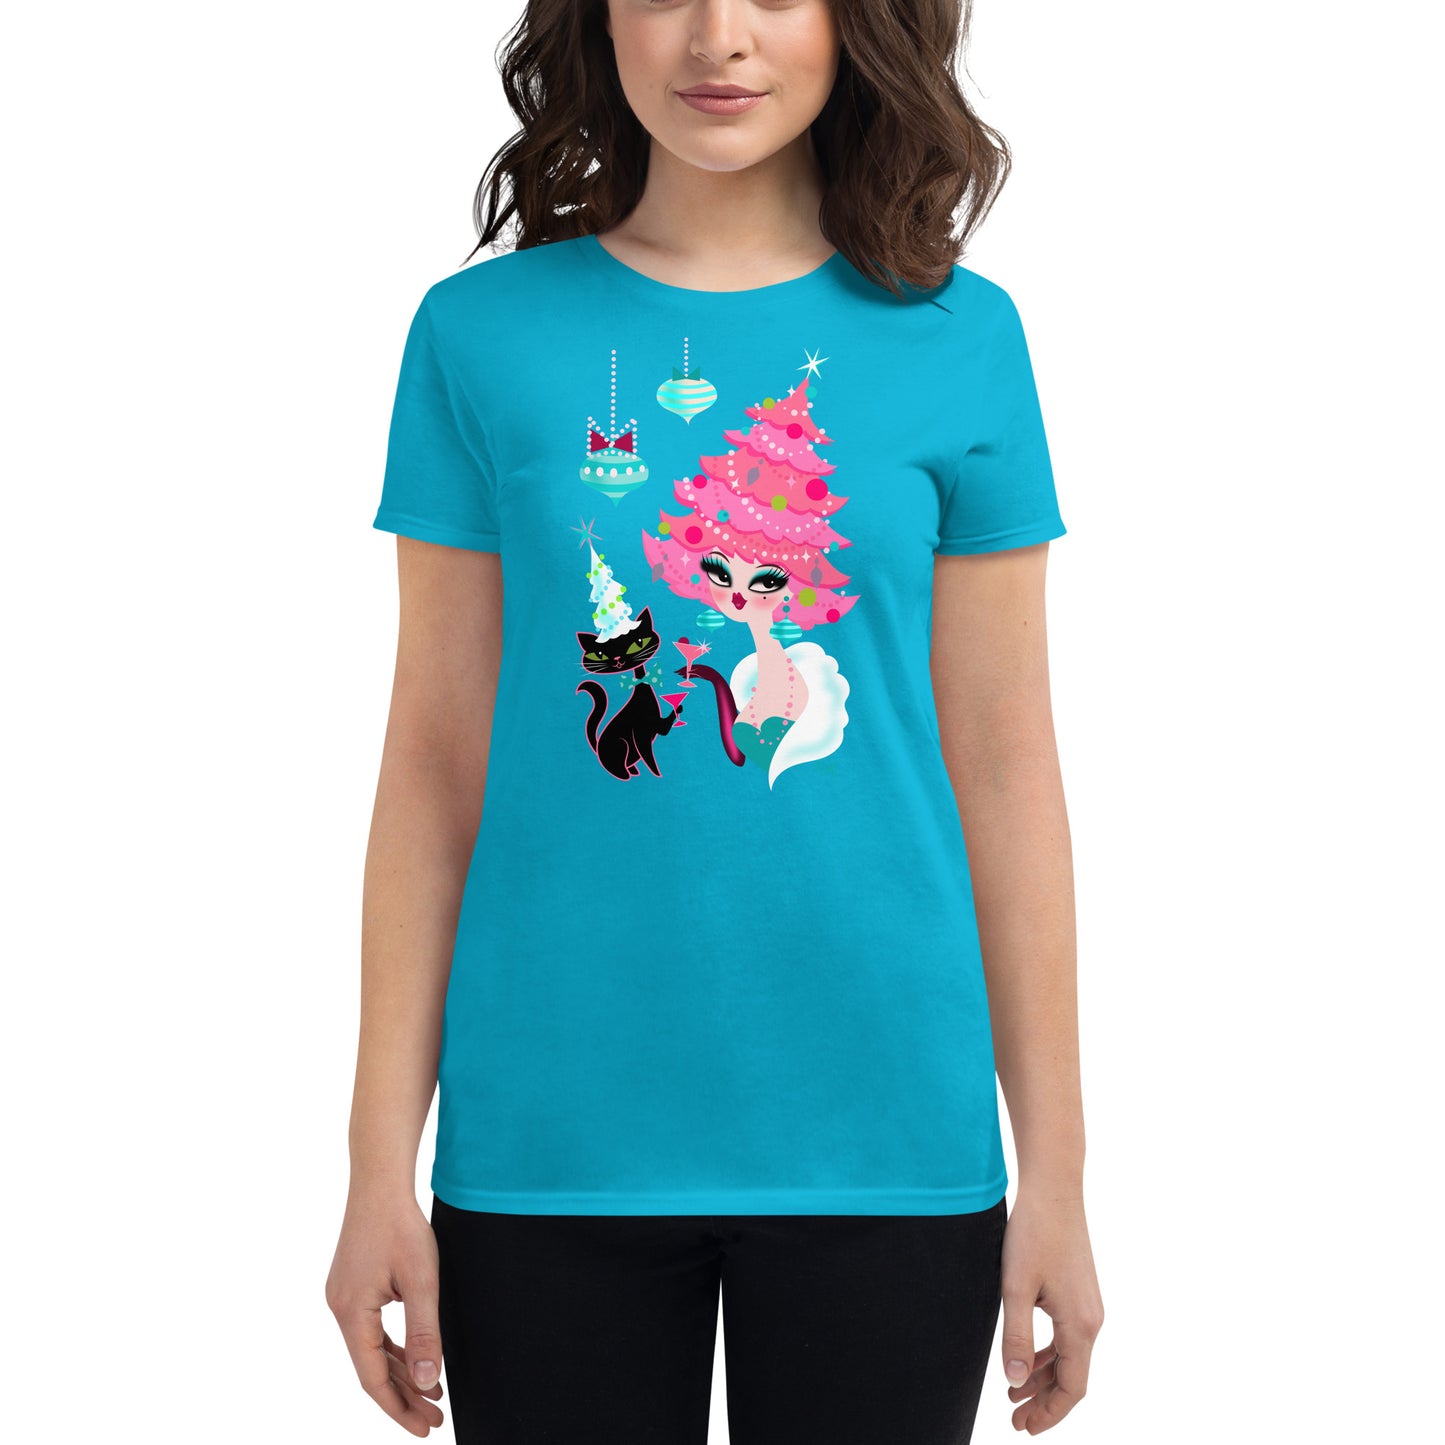 Pink Christmas Tree Doo • Women's Relaxed Fit T-Shirt